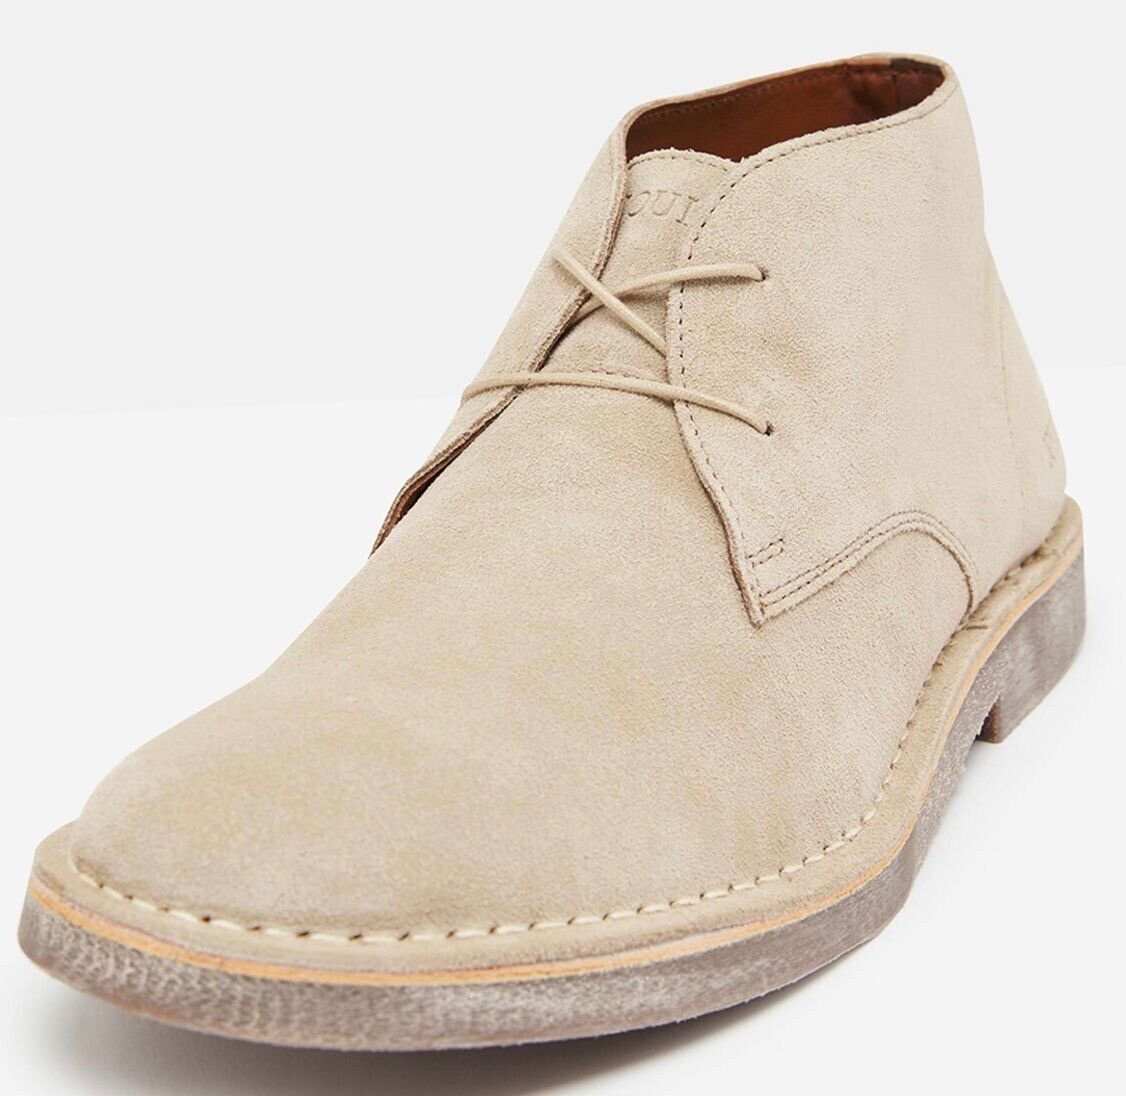 Joules Mens Suede Leather Desert Boots Stone Sizes 8, 9, 10, 11.5 RRP £79